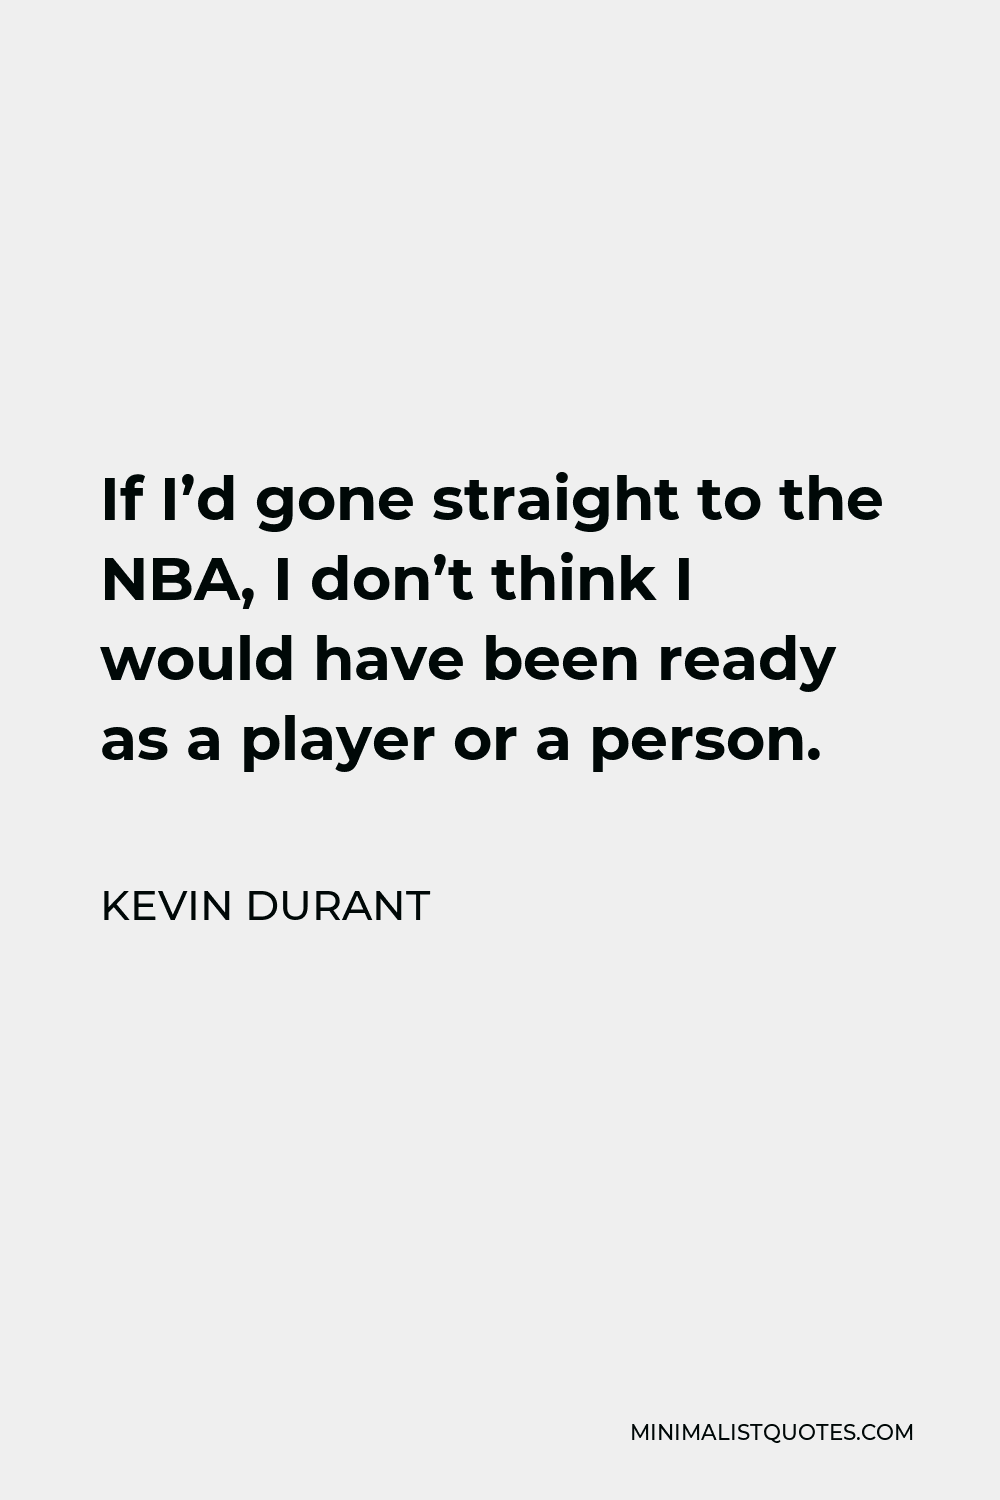 Kevin Durant Quote - If I’d gone straight to the NBA, I don’t think I would have been ready as a player or a person.